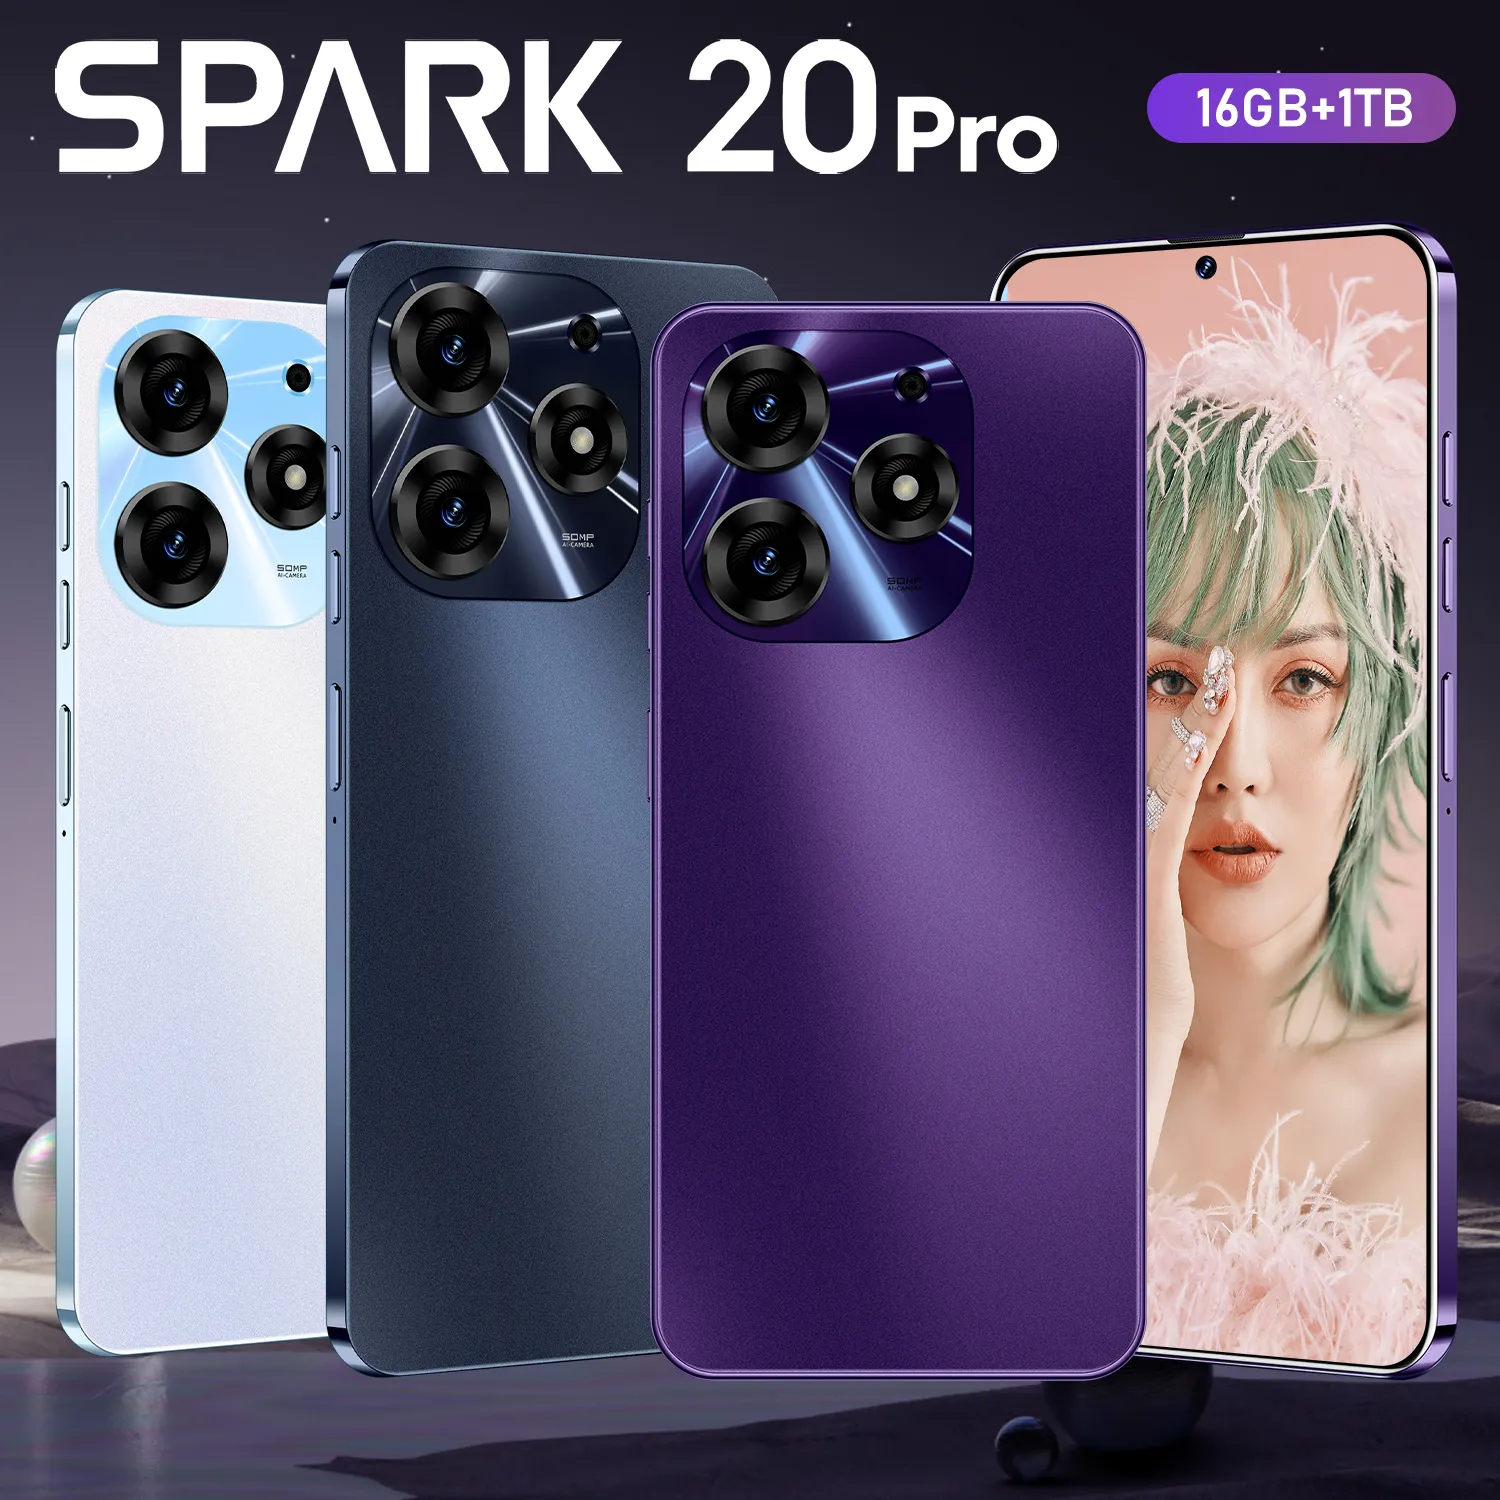 tecno spark 20 pro 7.3inch 16gb 1tb new arrival mobile phones with Google play